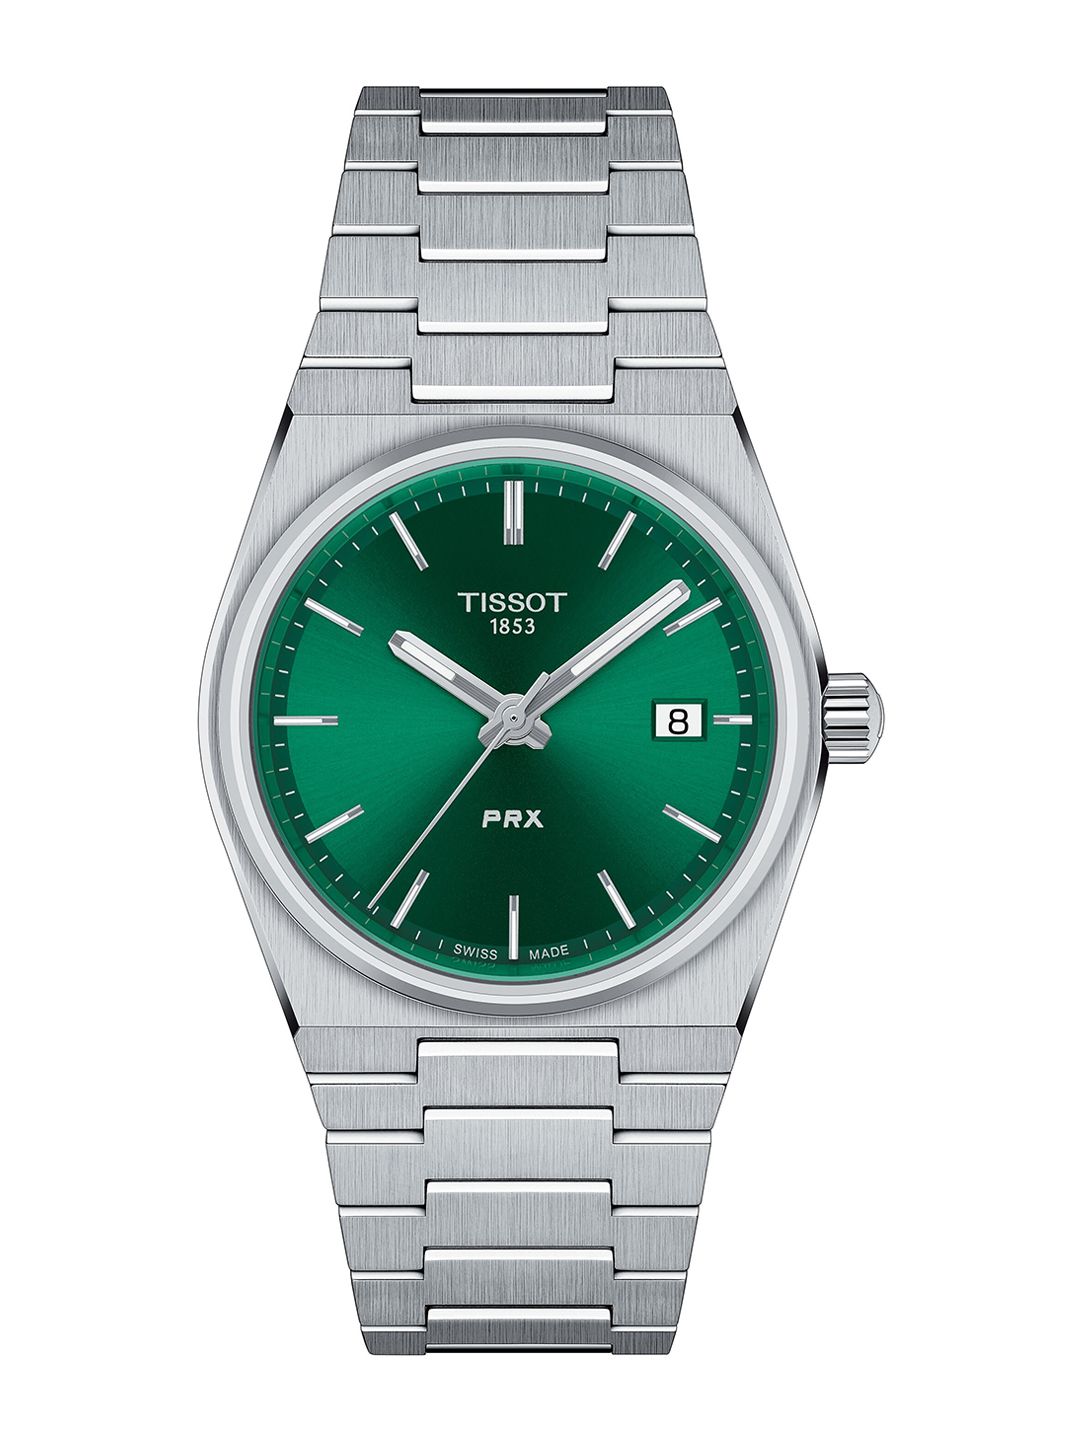 TISSOT Unisex Green Dial & Stainless Steel Bracelet Style Straps Analogue Watch T1372101108100